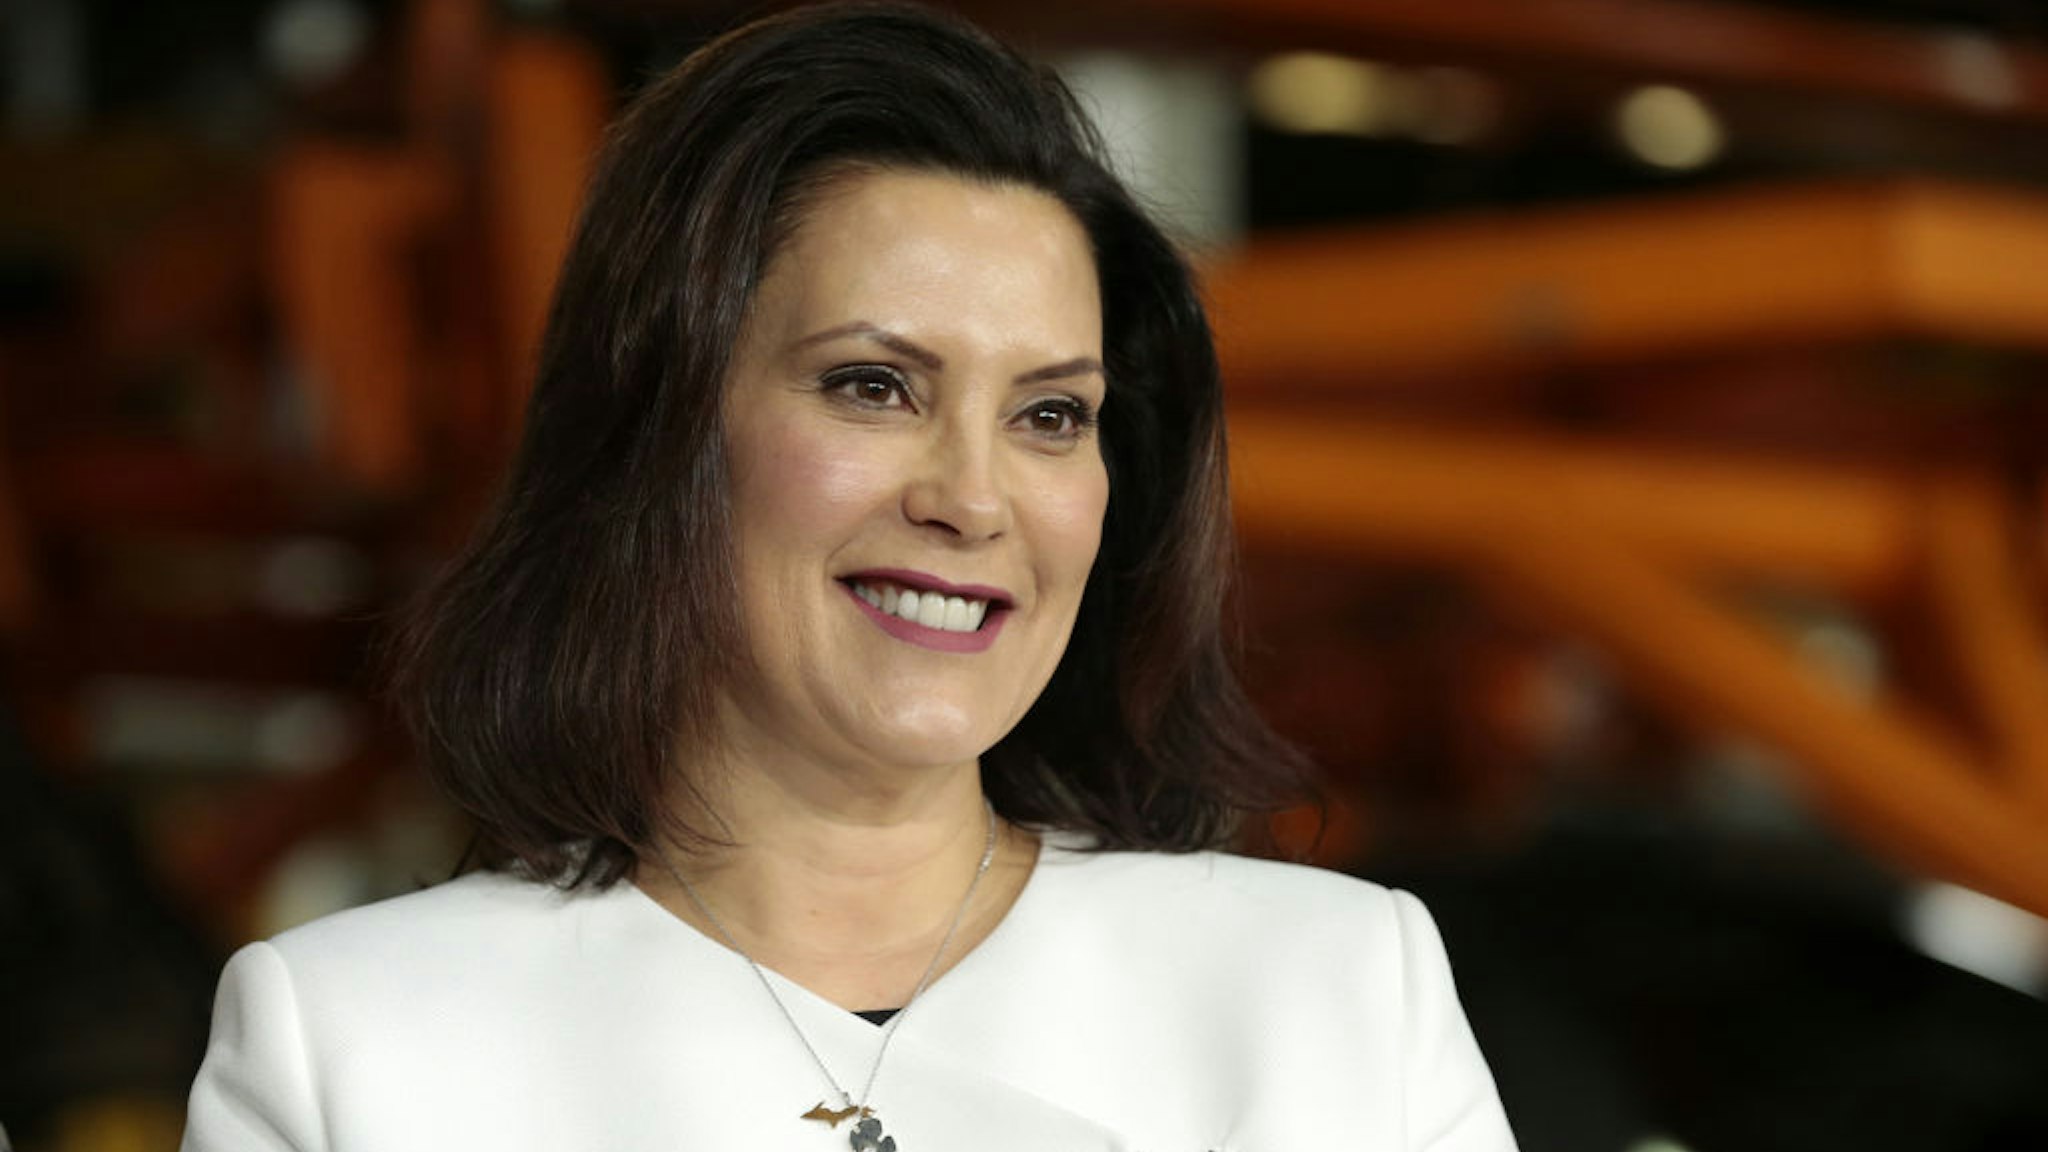 Gretchen Whitmer, governor of Michigan, smiles during an event at the General Motors Co. Orion Assembly plant in Orion Township, Michigan, U.S., on Friday, March 22, 2019.